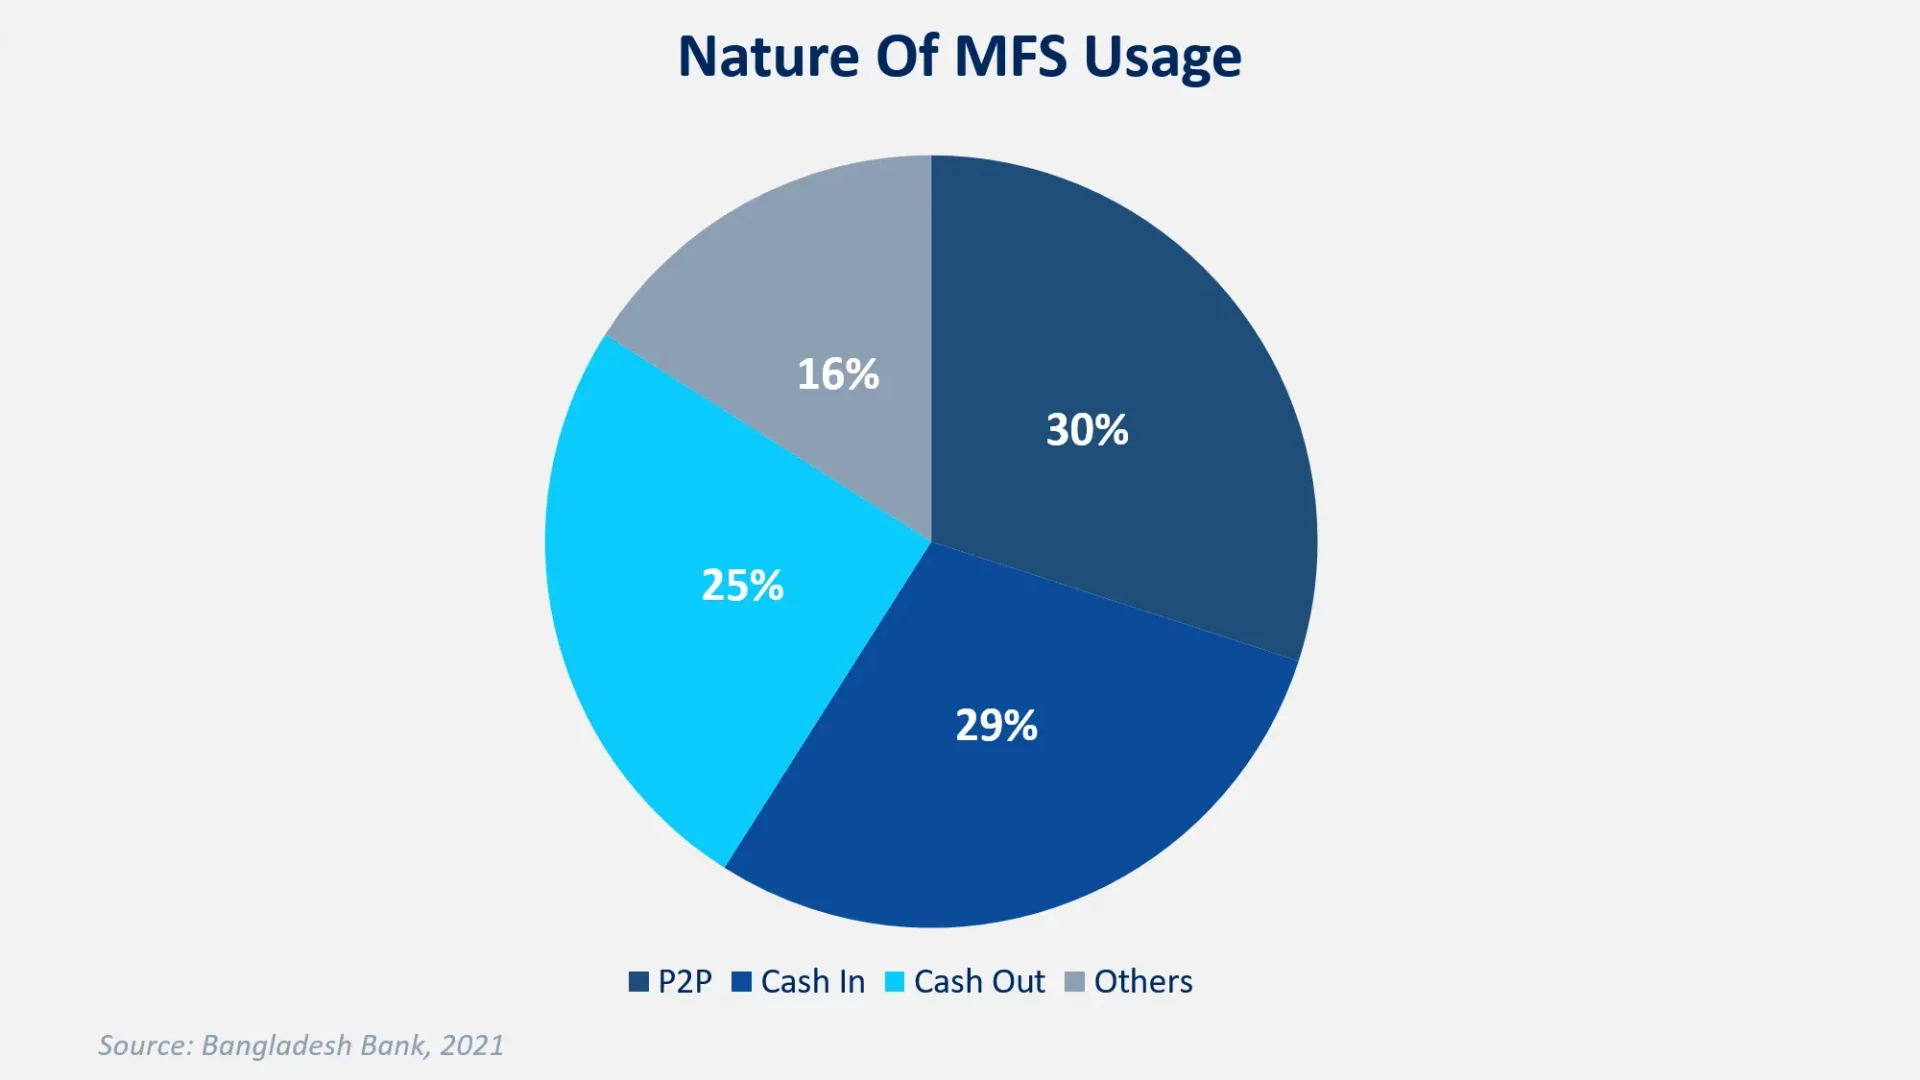 Nature of Mobile Financial Service Usage